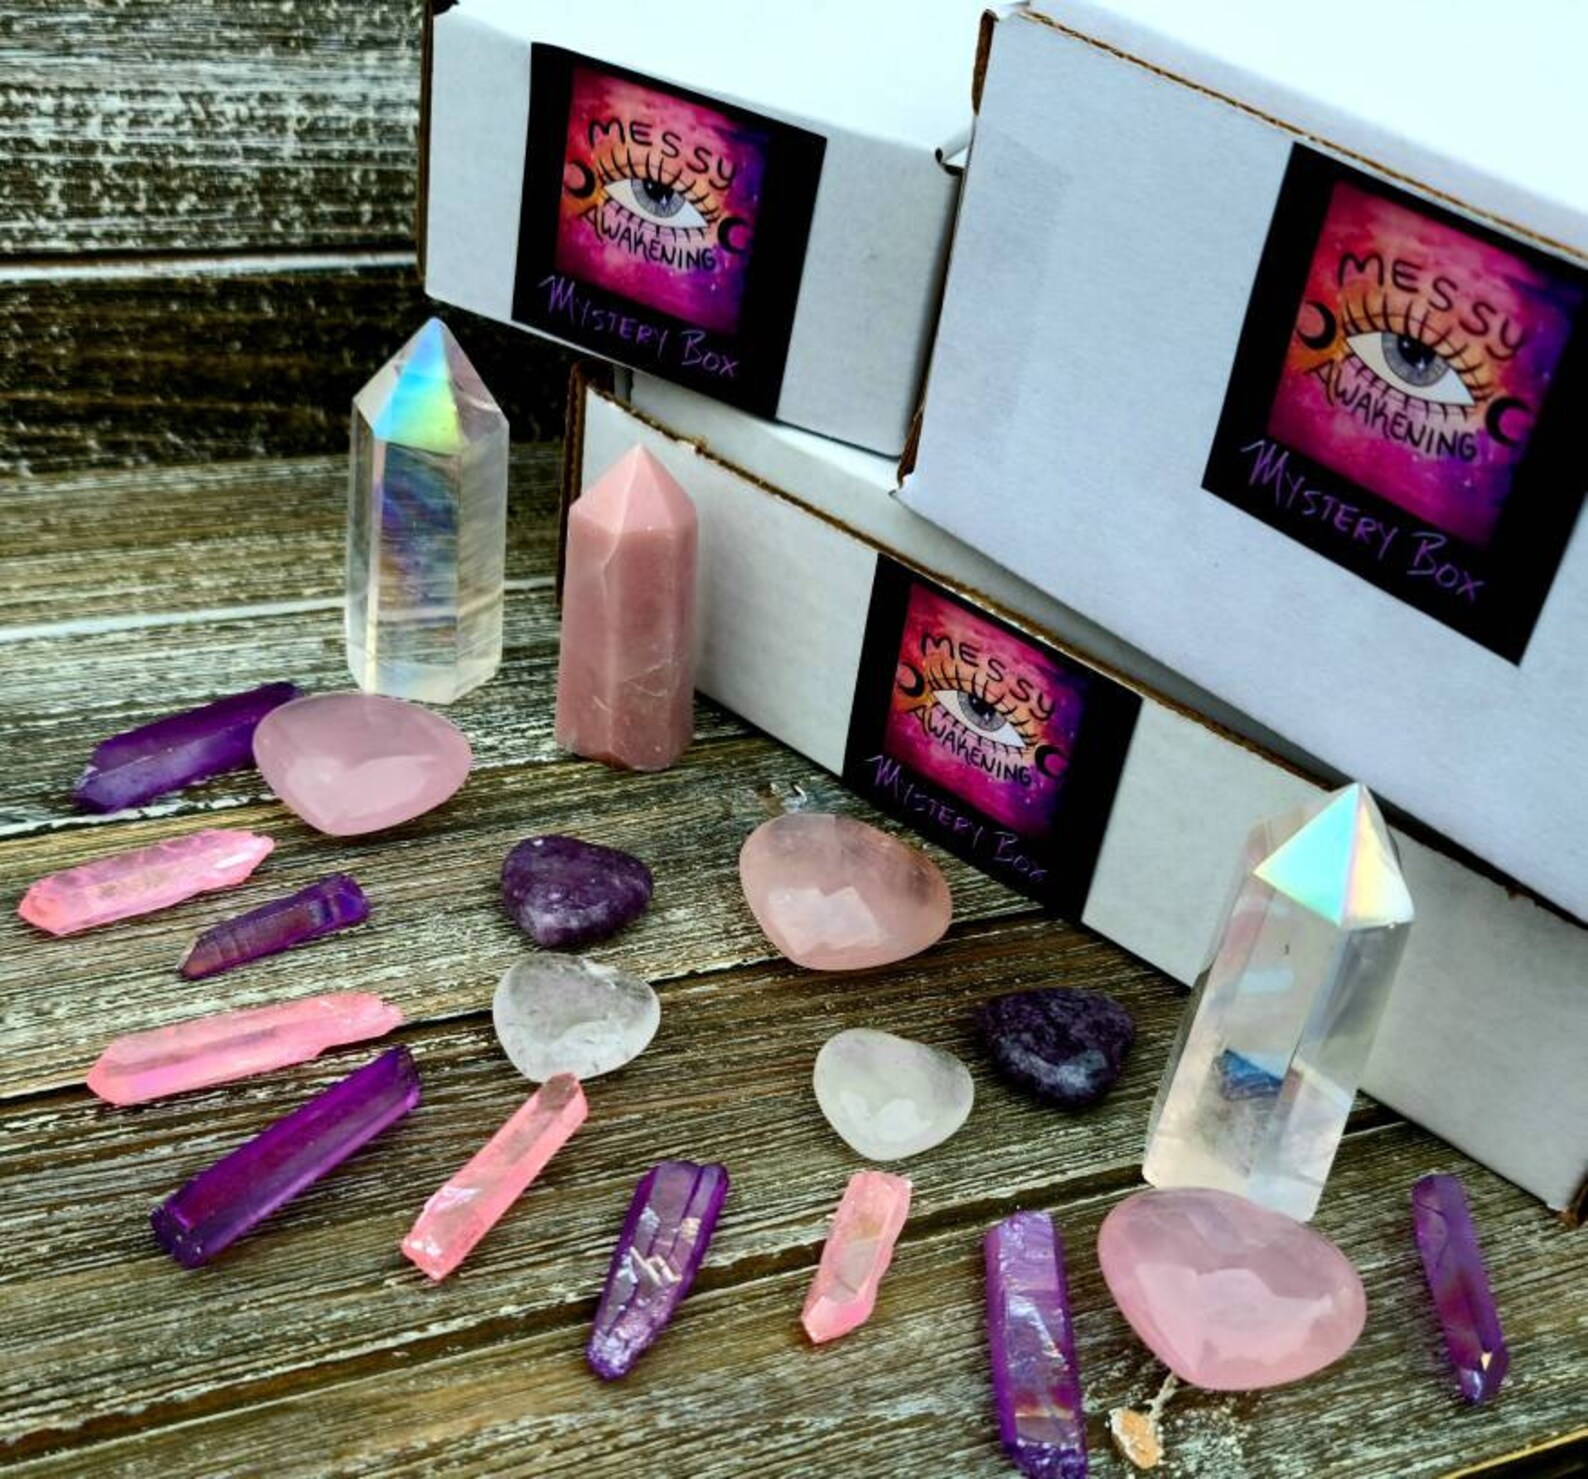 Witchy mystery box filled with spiritual items, crystals and more